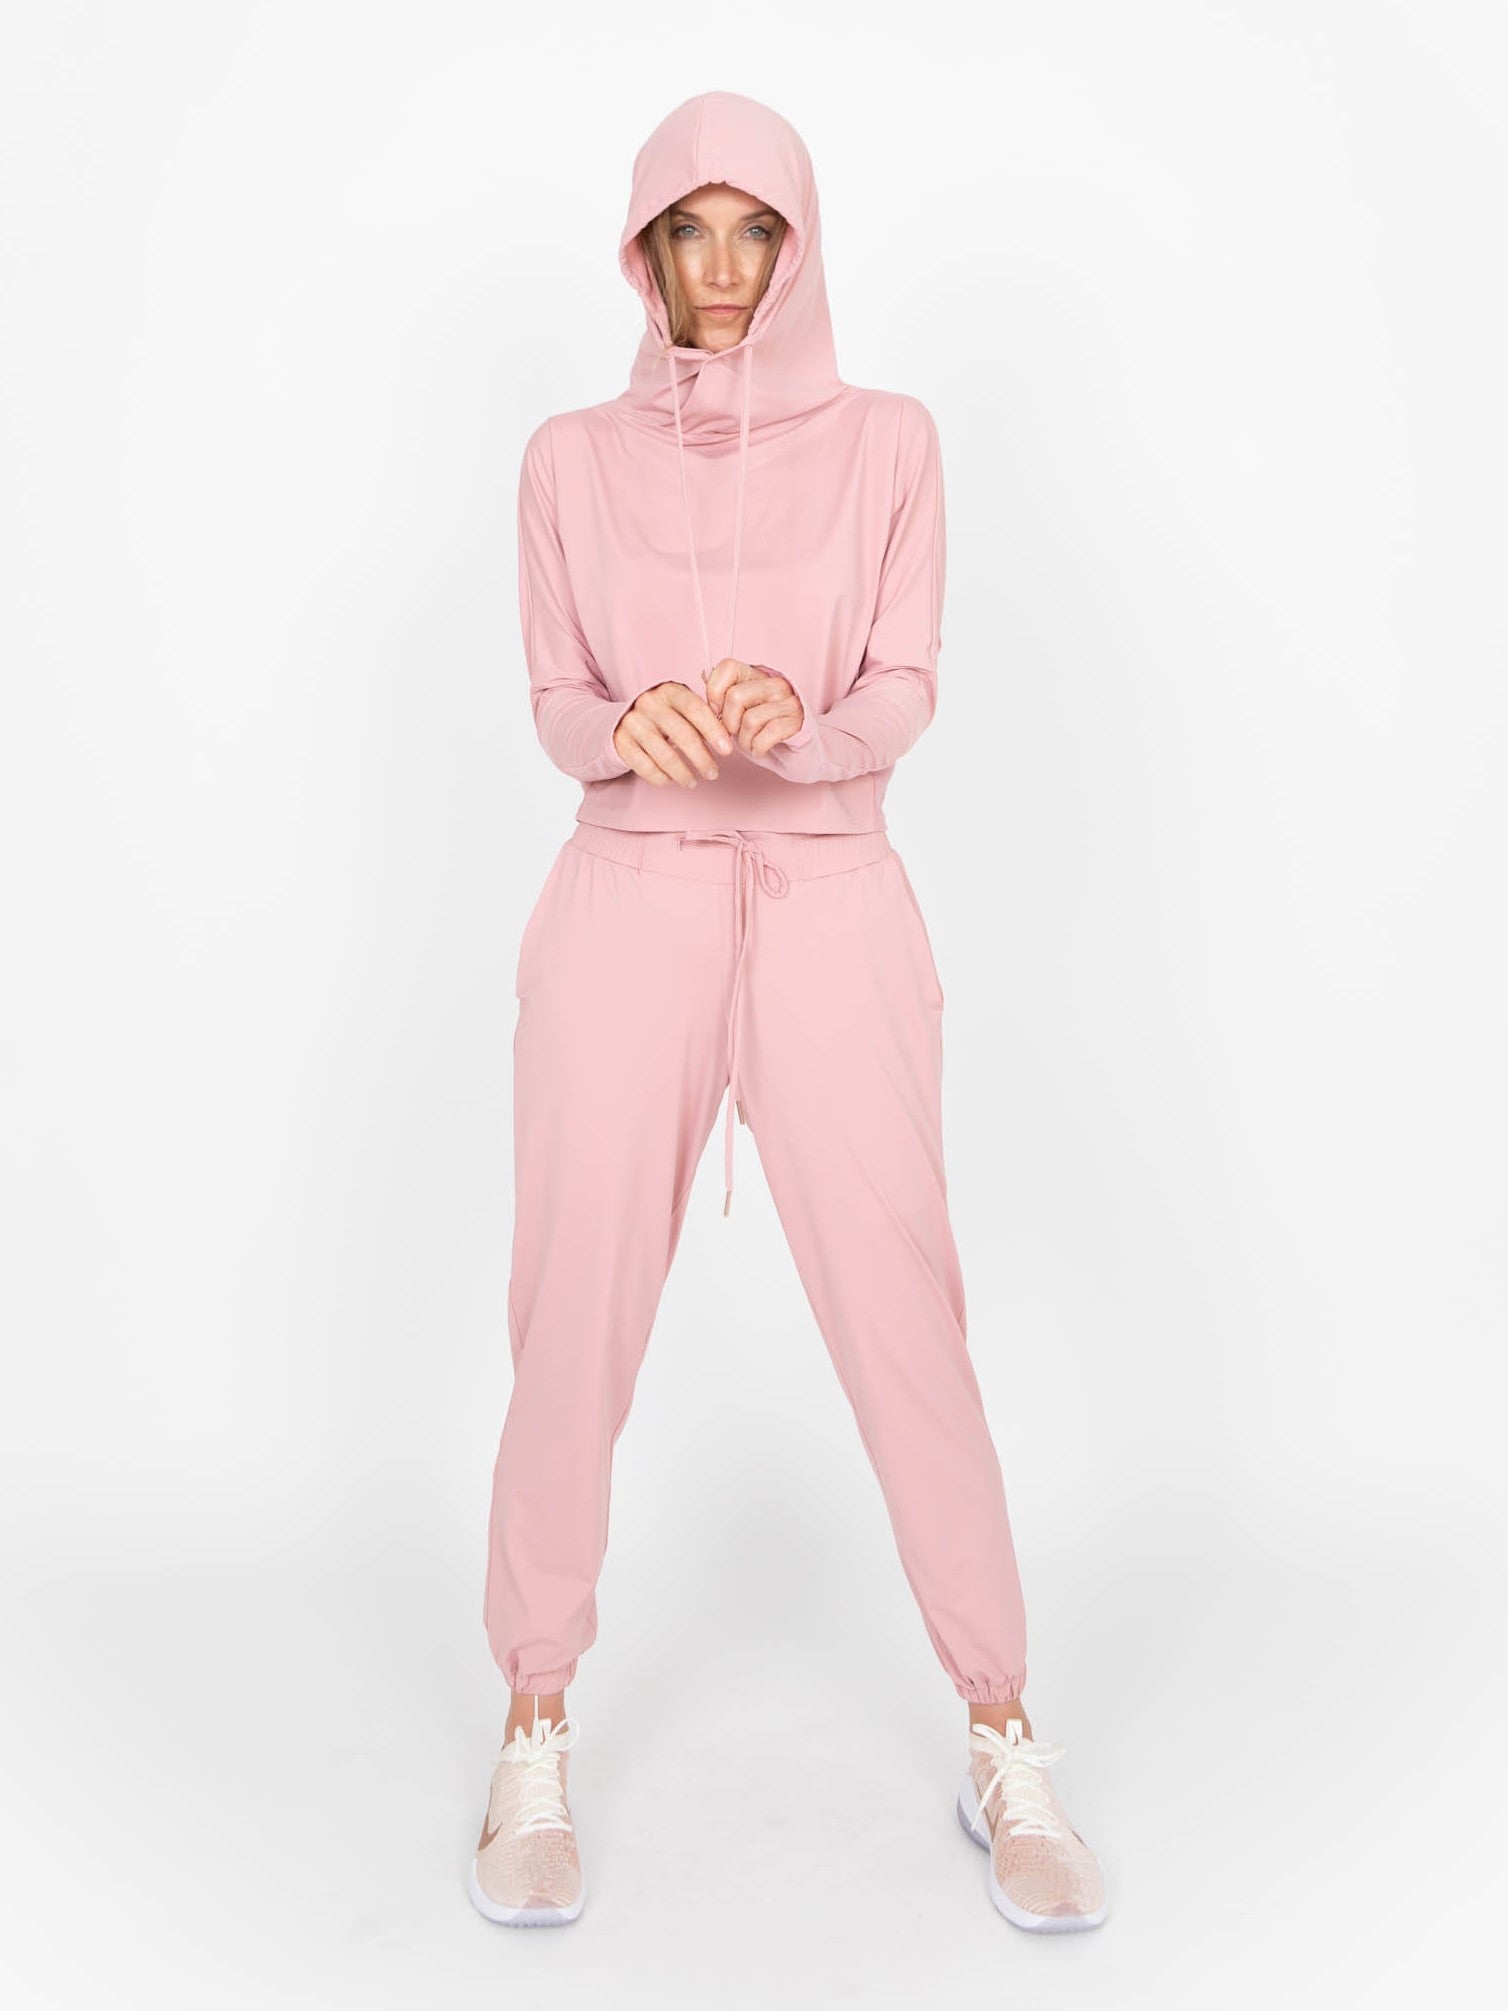 Woman wearing a lightweight long sleeved sun protective hoodie with hand coverings in blush pink and matching drawstring pants. 